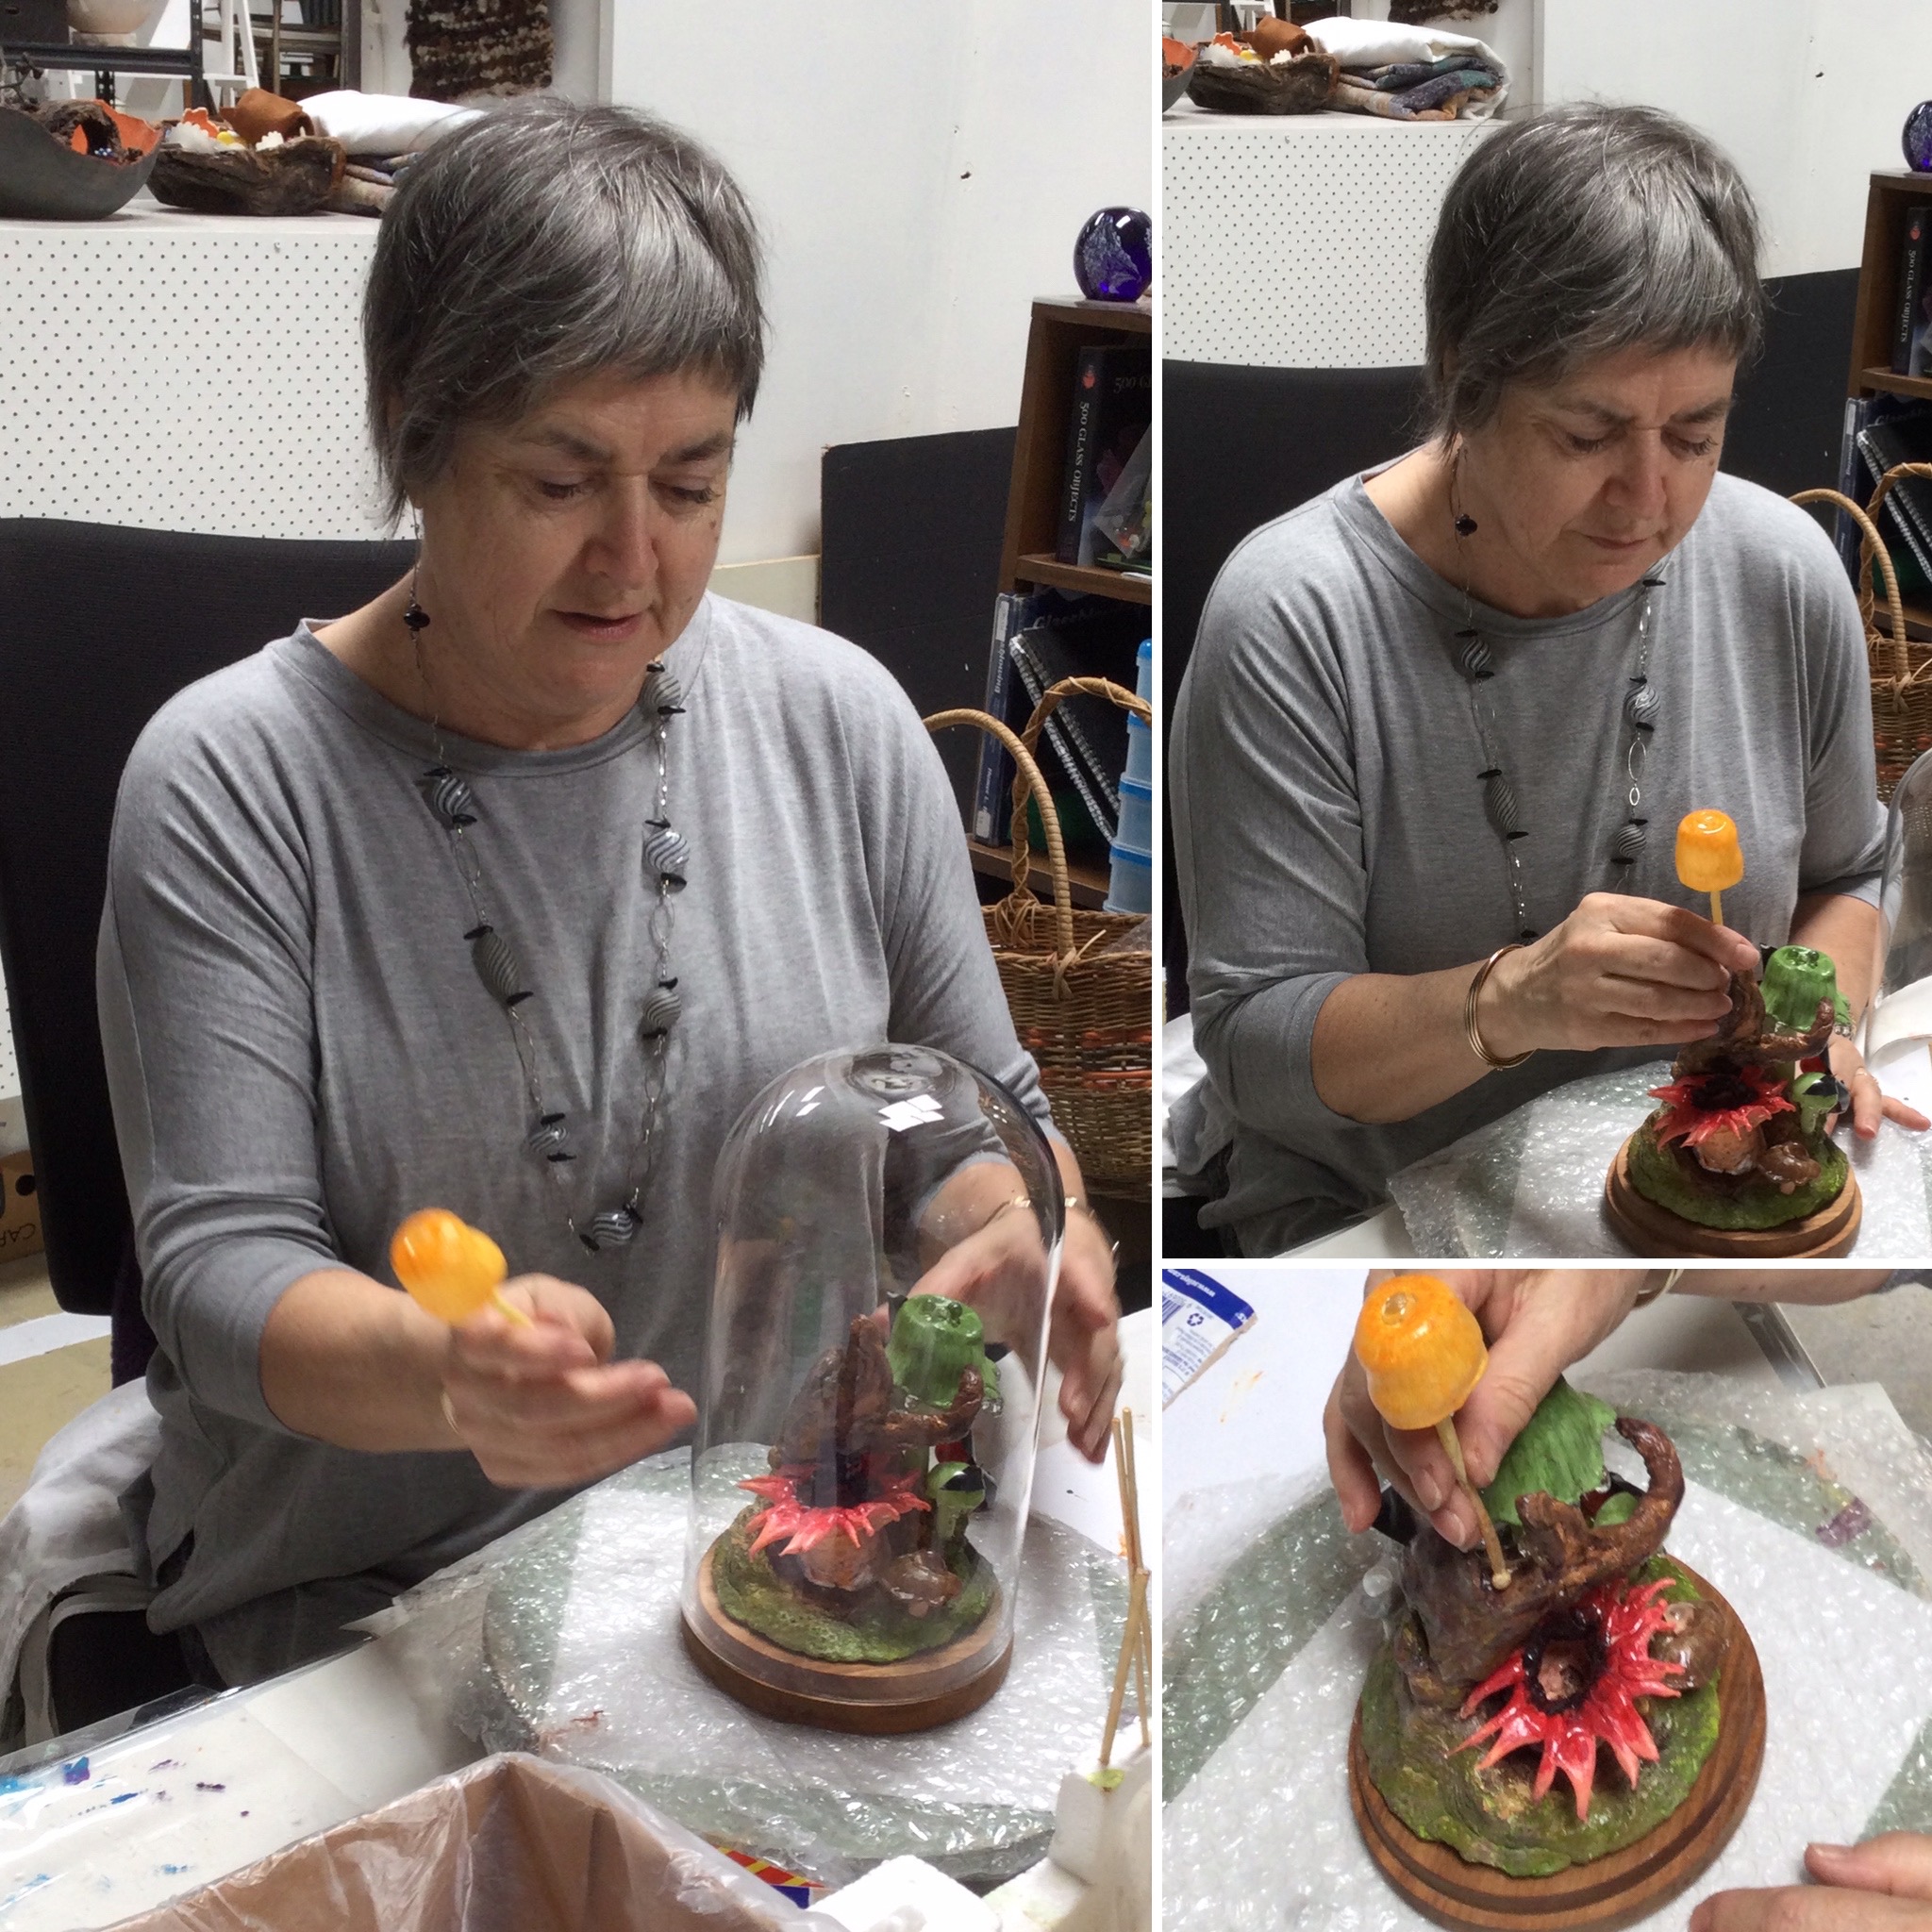 Showing the assembling process of a glass artist for Helen Boyer Artist Profile with Art Trails Tasmania